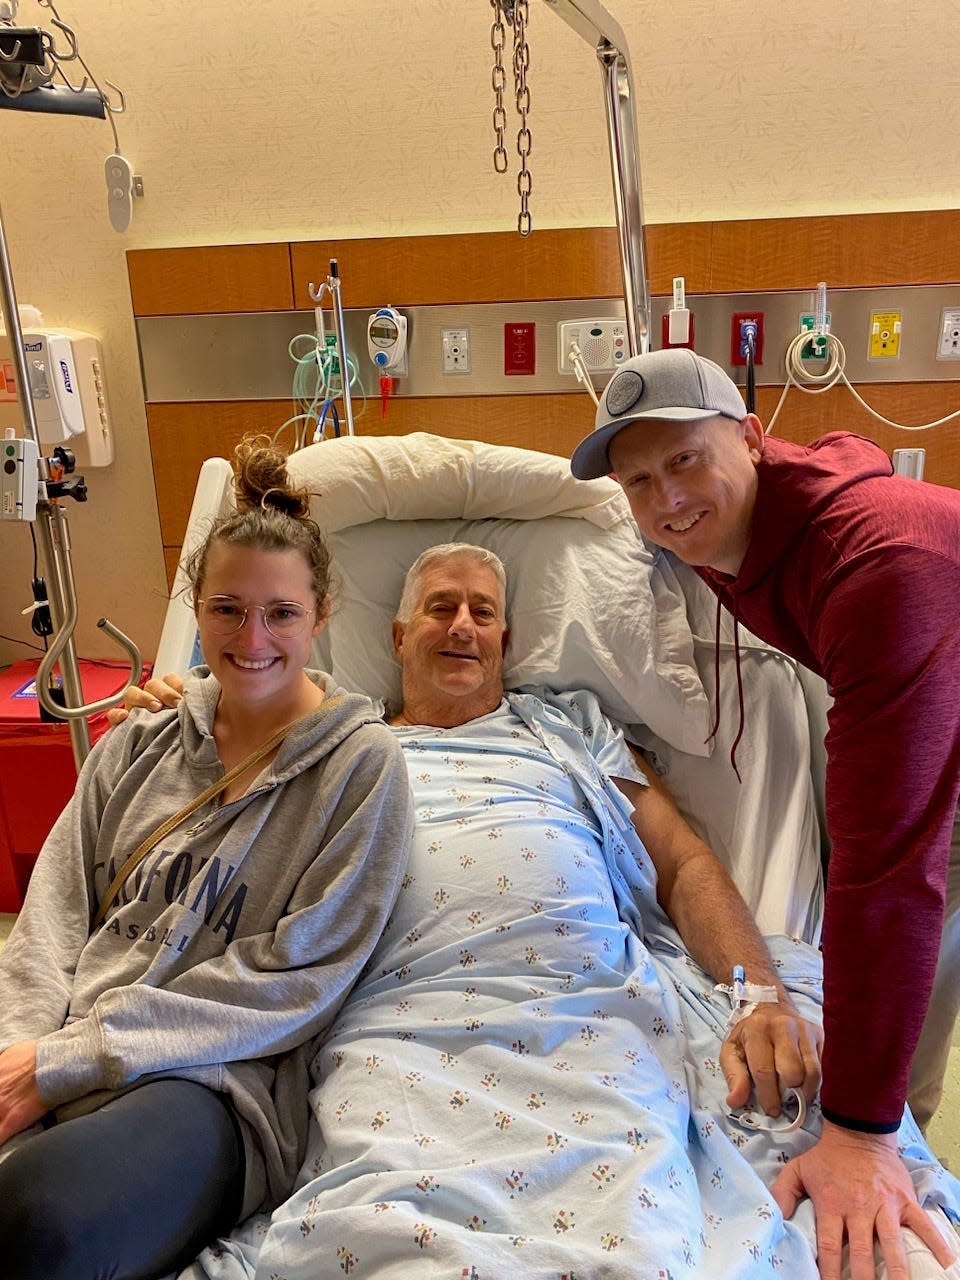 Kaitie Goodwin and Perry Hess visit Pat O'Shaughnessy, center, after successful surgery to remove a cancerous tumor from his kidney. A longtime friend of Goodwin's family, O'Shaughnessy had planned to donate his kidney to Hess, but those plans changed after cancer was found.